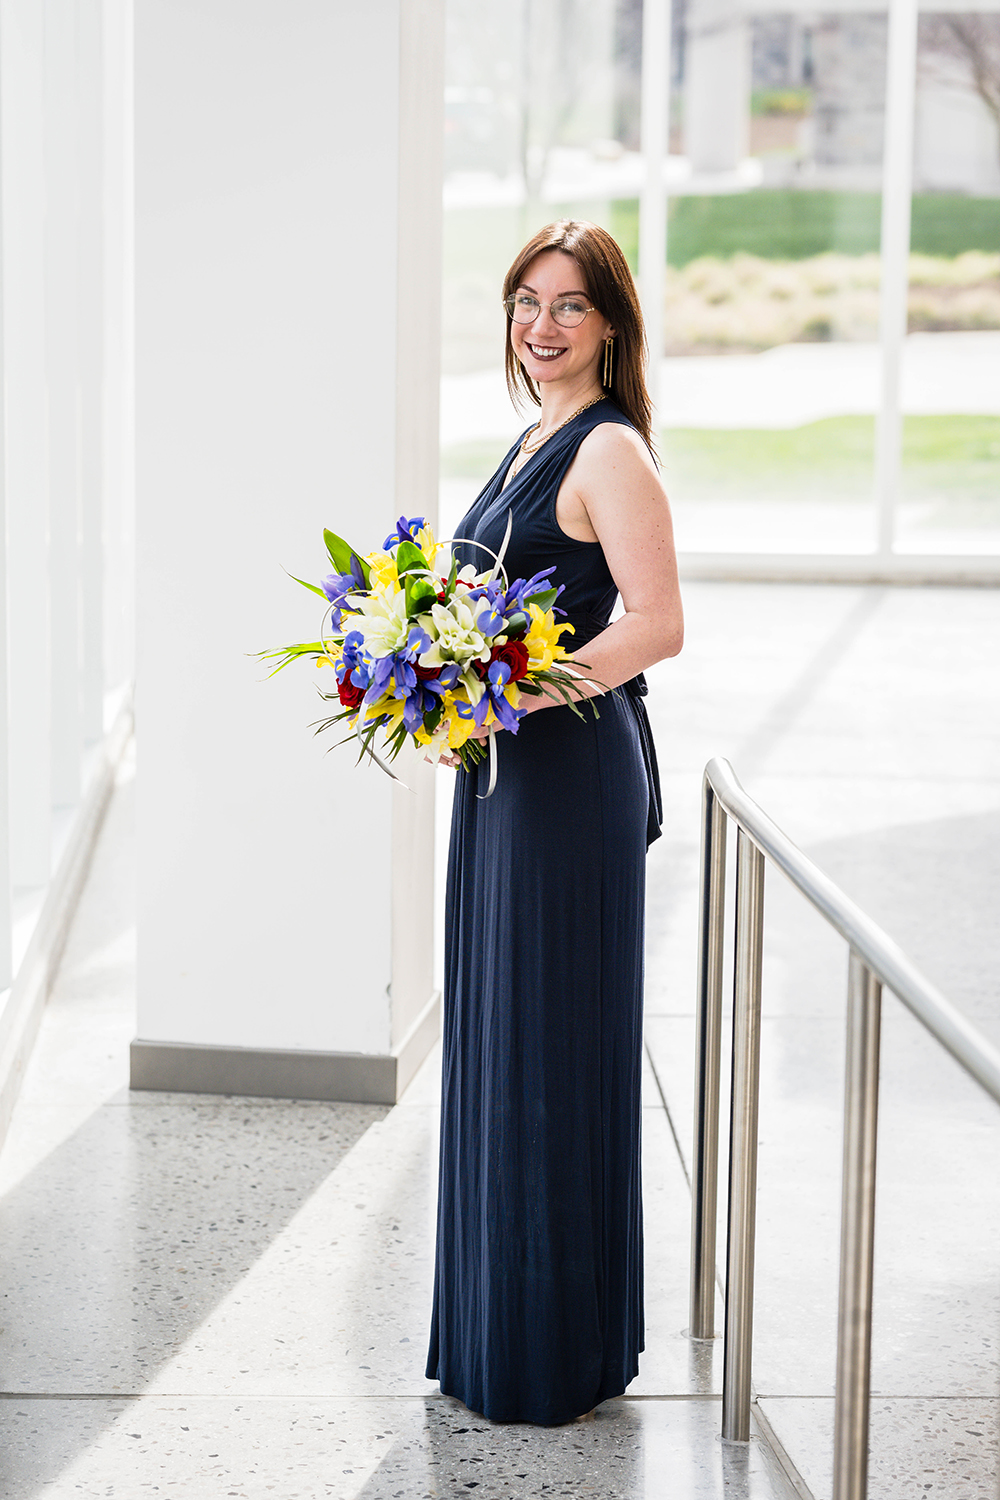 A marrier poses with her wedding bouquet on her elopement day at the Moss Arts Center in Blacksburg, Virginia.